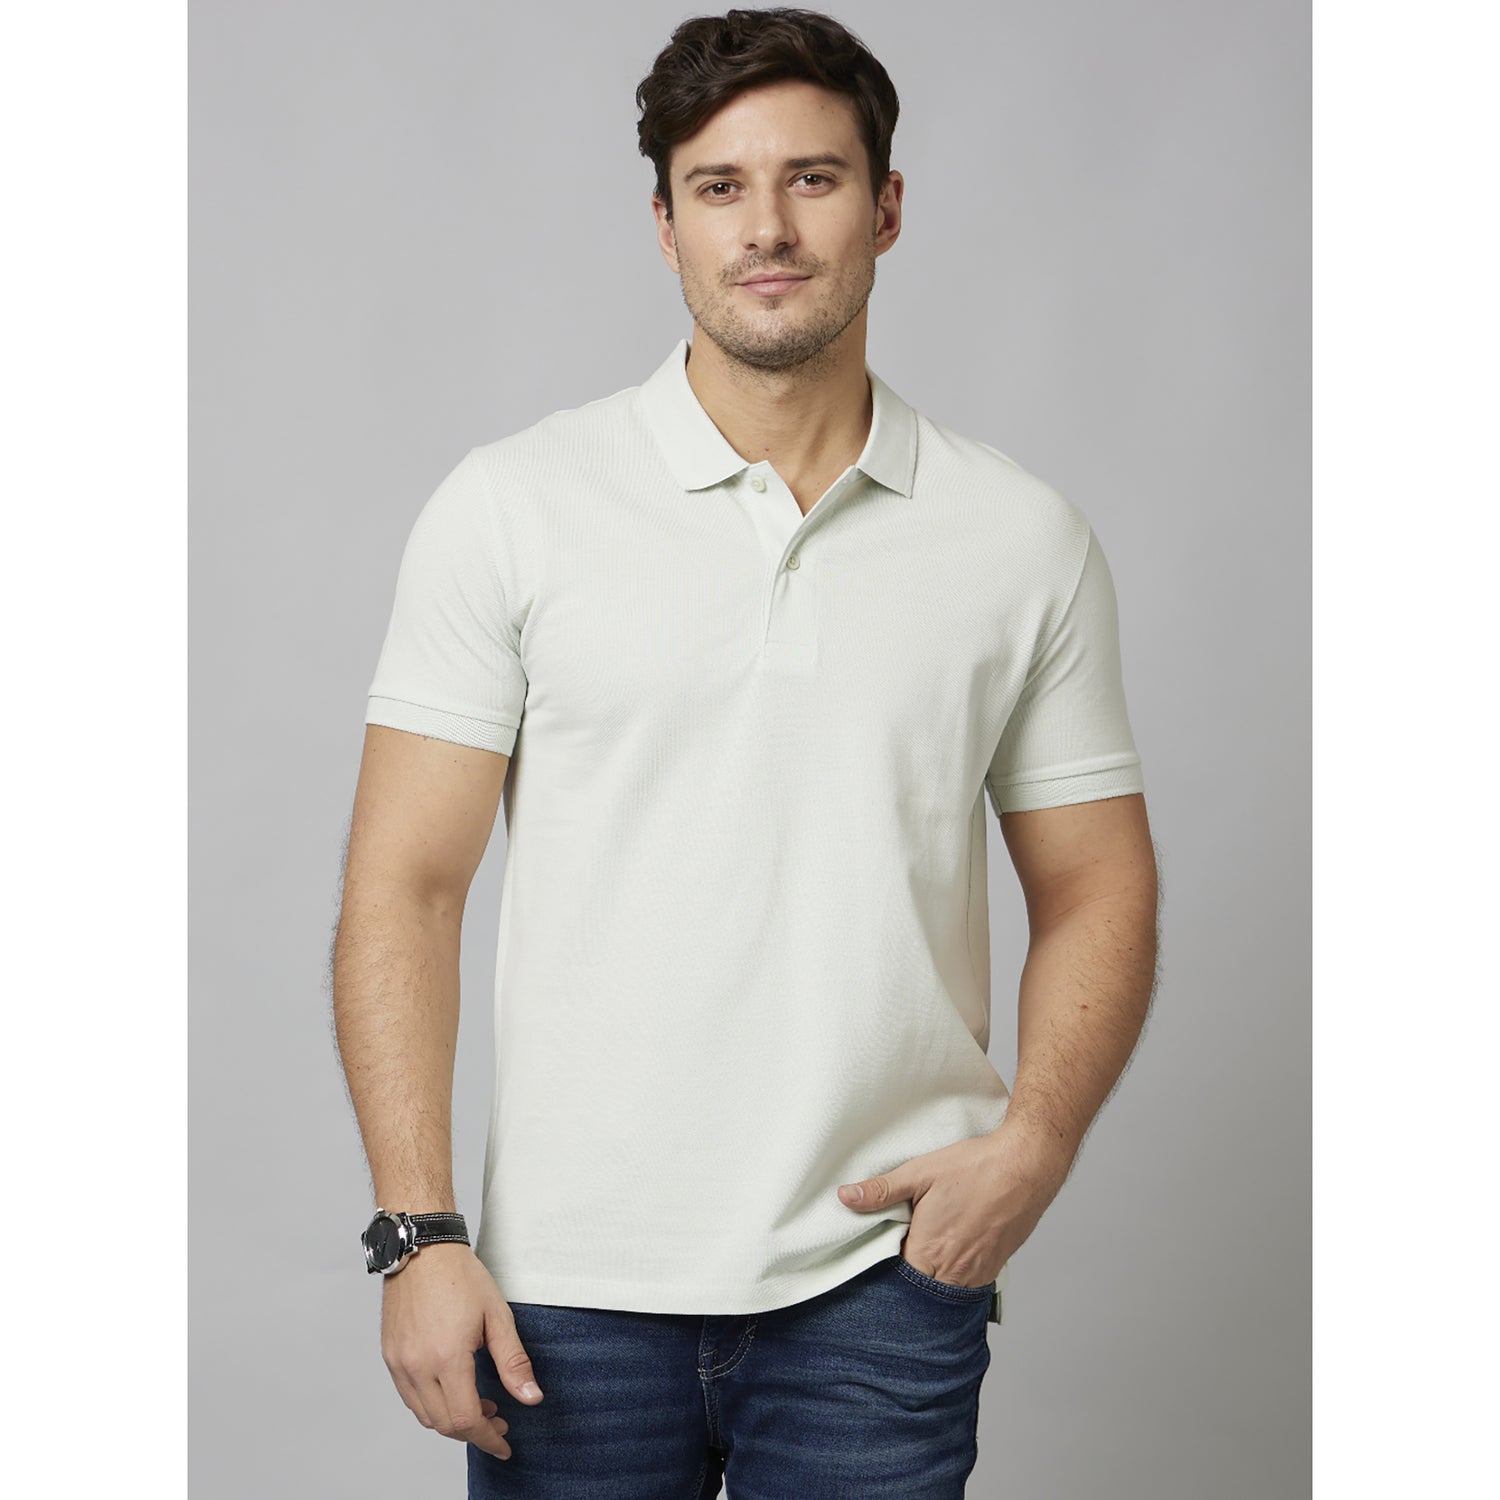 Green Solid Half Sleeve Cotton T-Shirts (TEONE2)